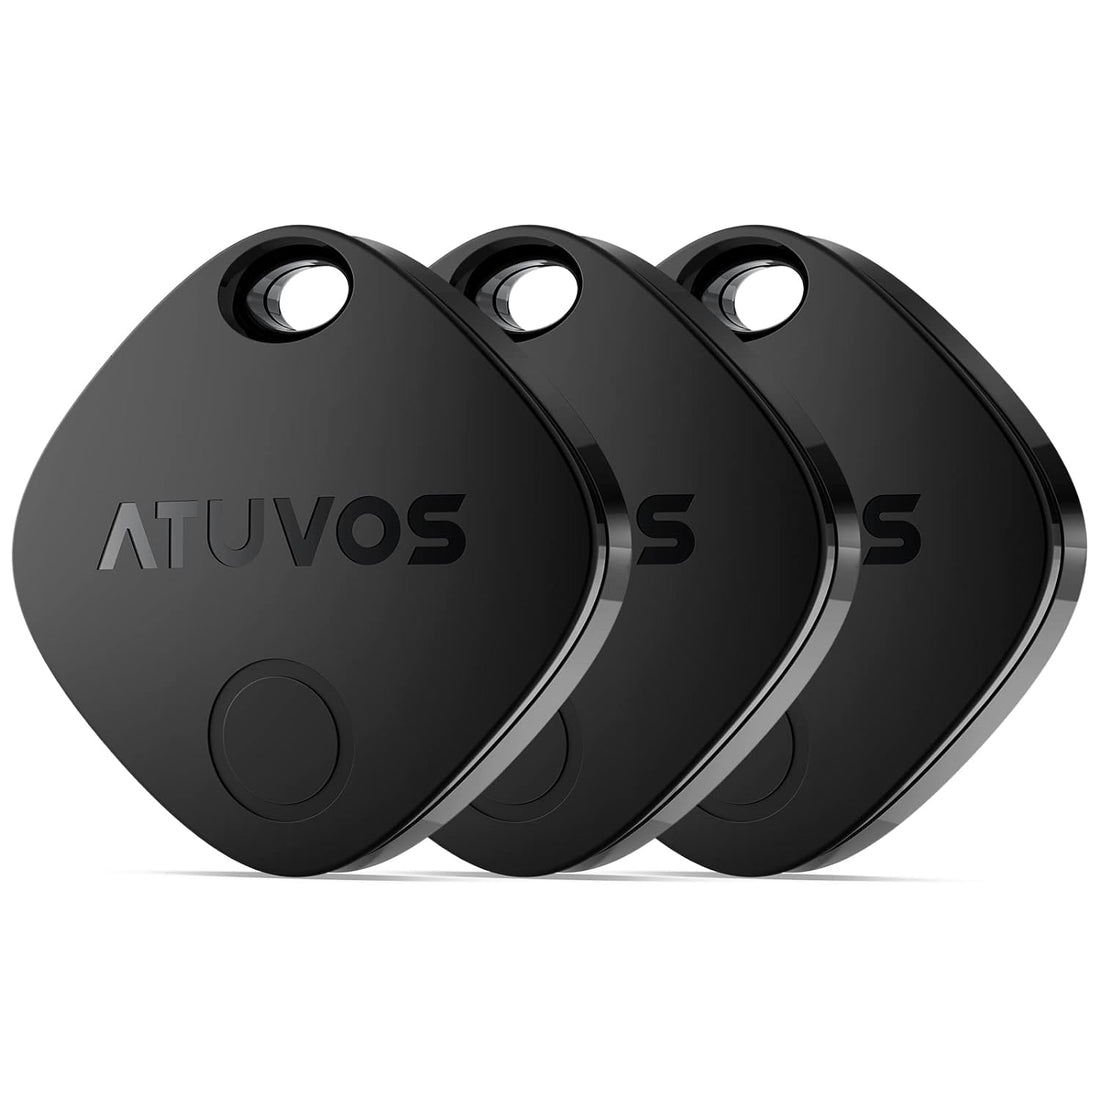 ATUVOS Key Tag, Bluetooth Tracker Works with Apple Find My (iOS only), IP67 Waterproof, Privacy Protection, Lost Mode, Item Locator for Suitcase, Bags, and More 3 Pack Black